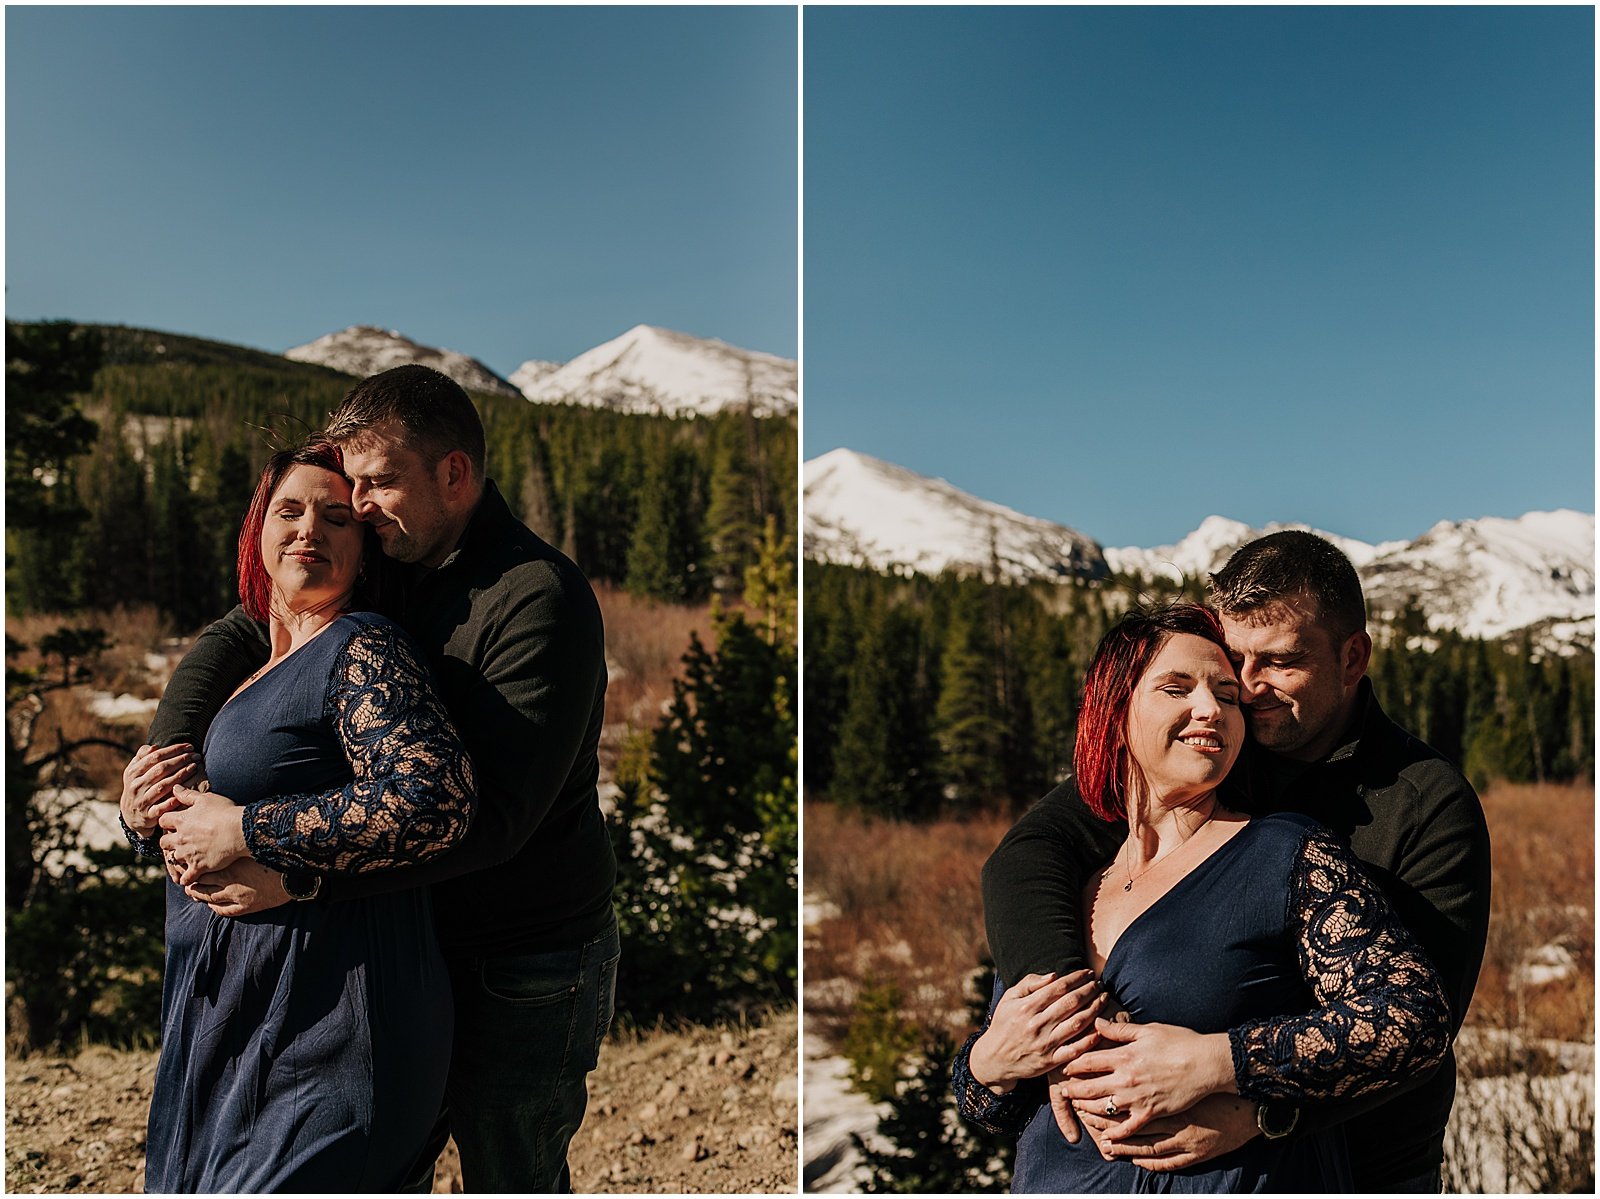 Mountain engagement photos at Dream Lake in Rocky Mountain national park Colorado 